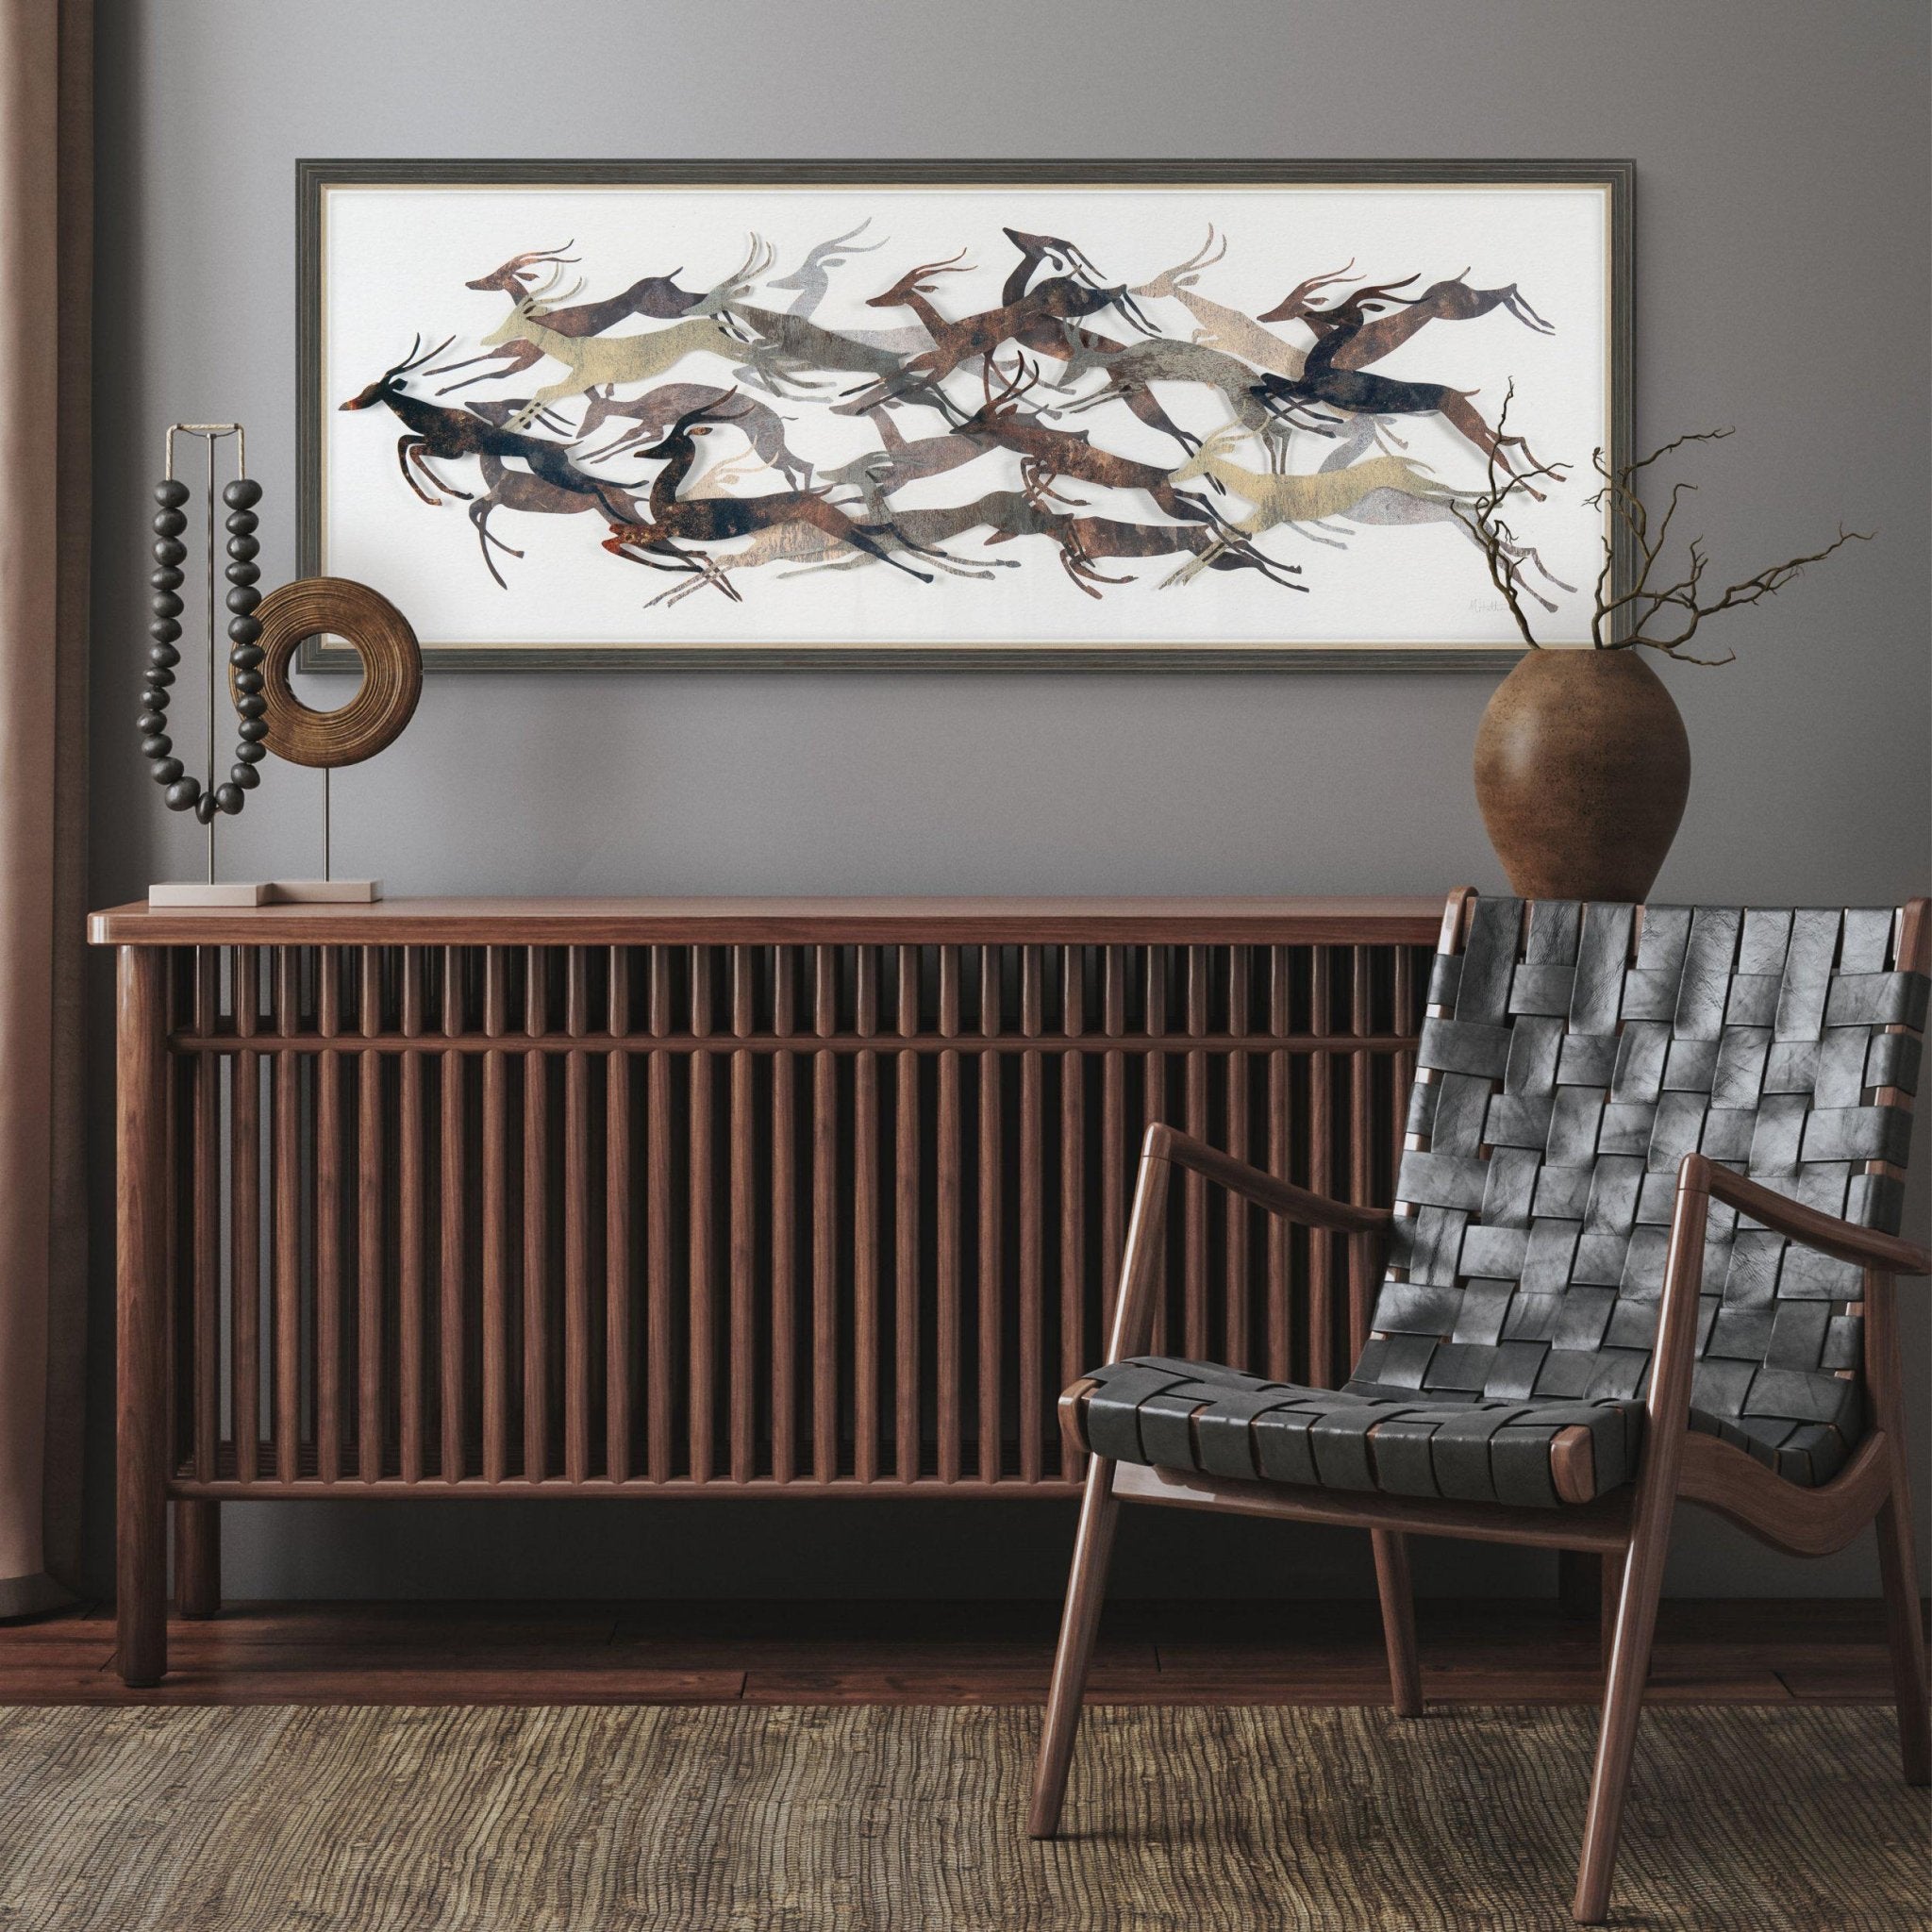 All Together Now by Mark Hather - Duck Barn Interiors